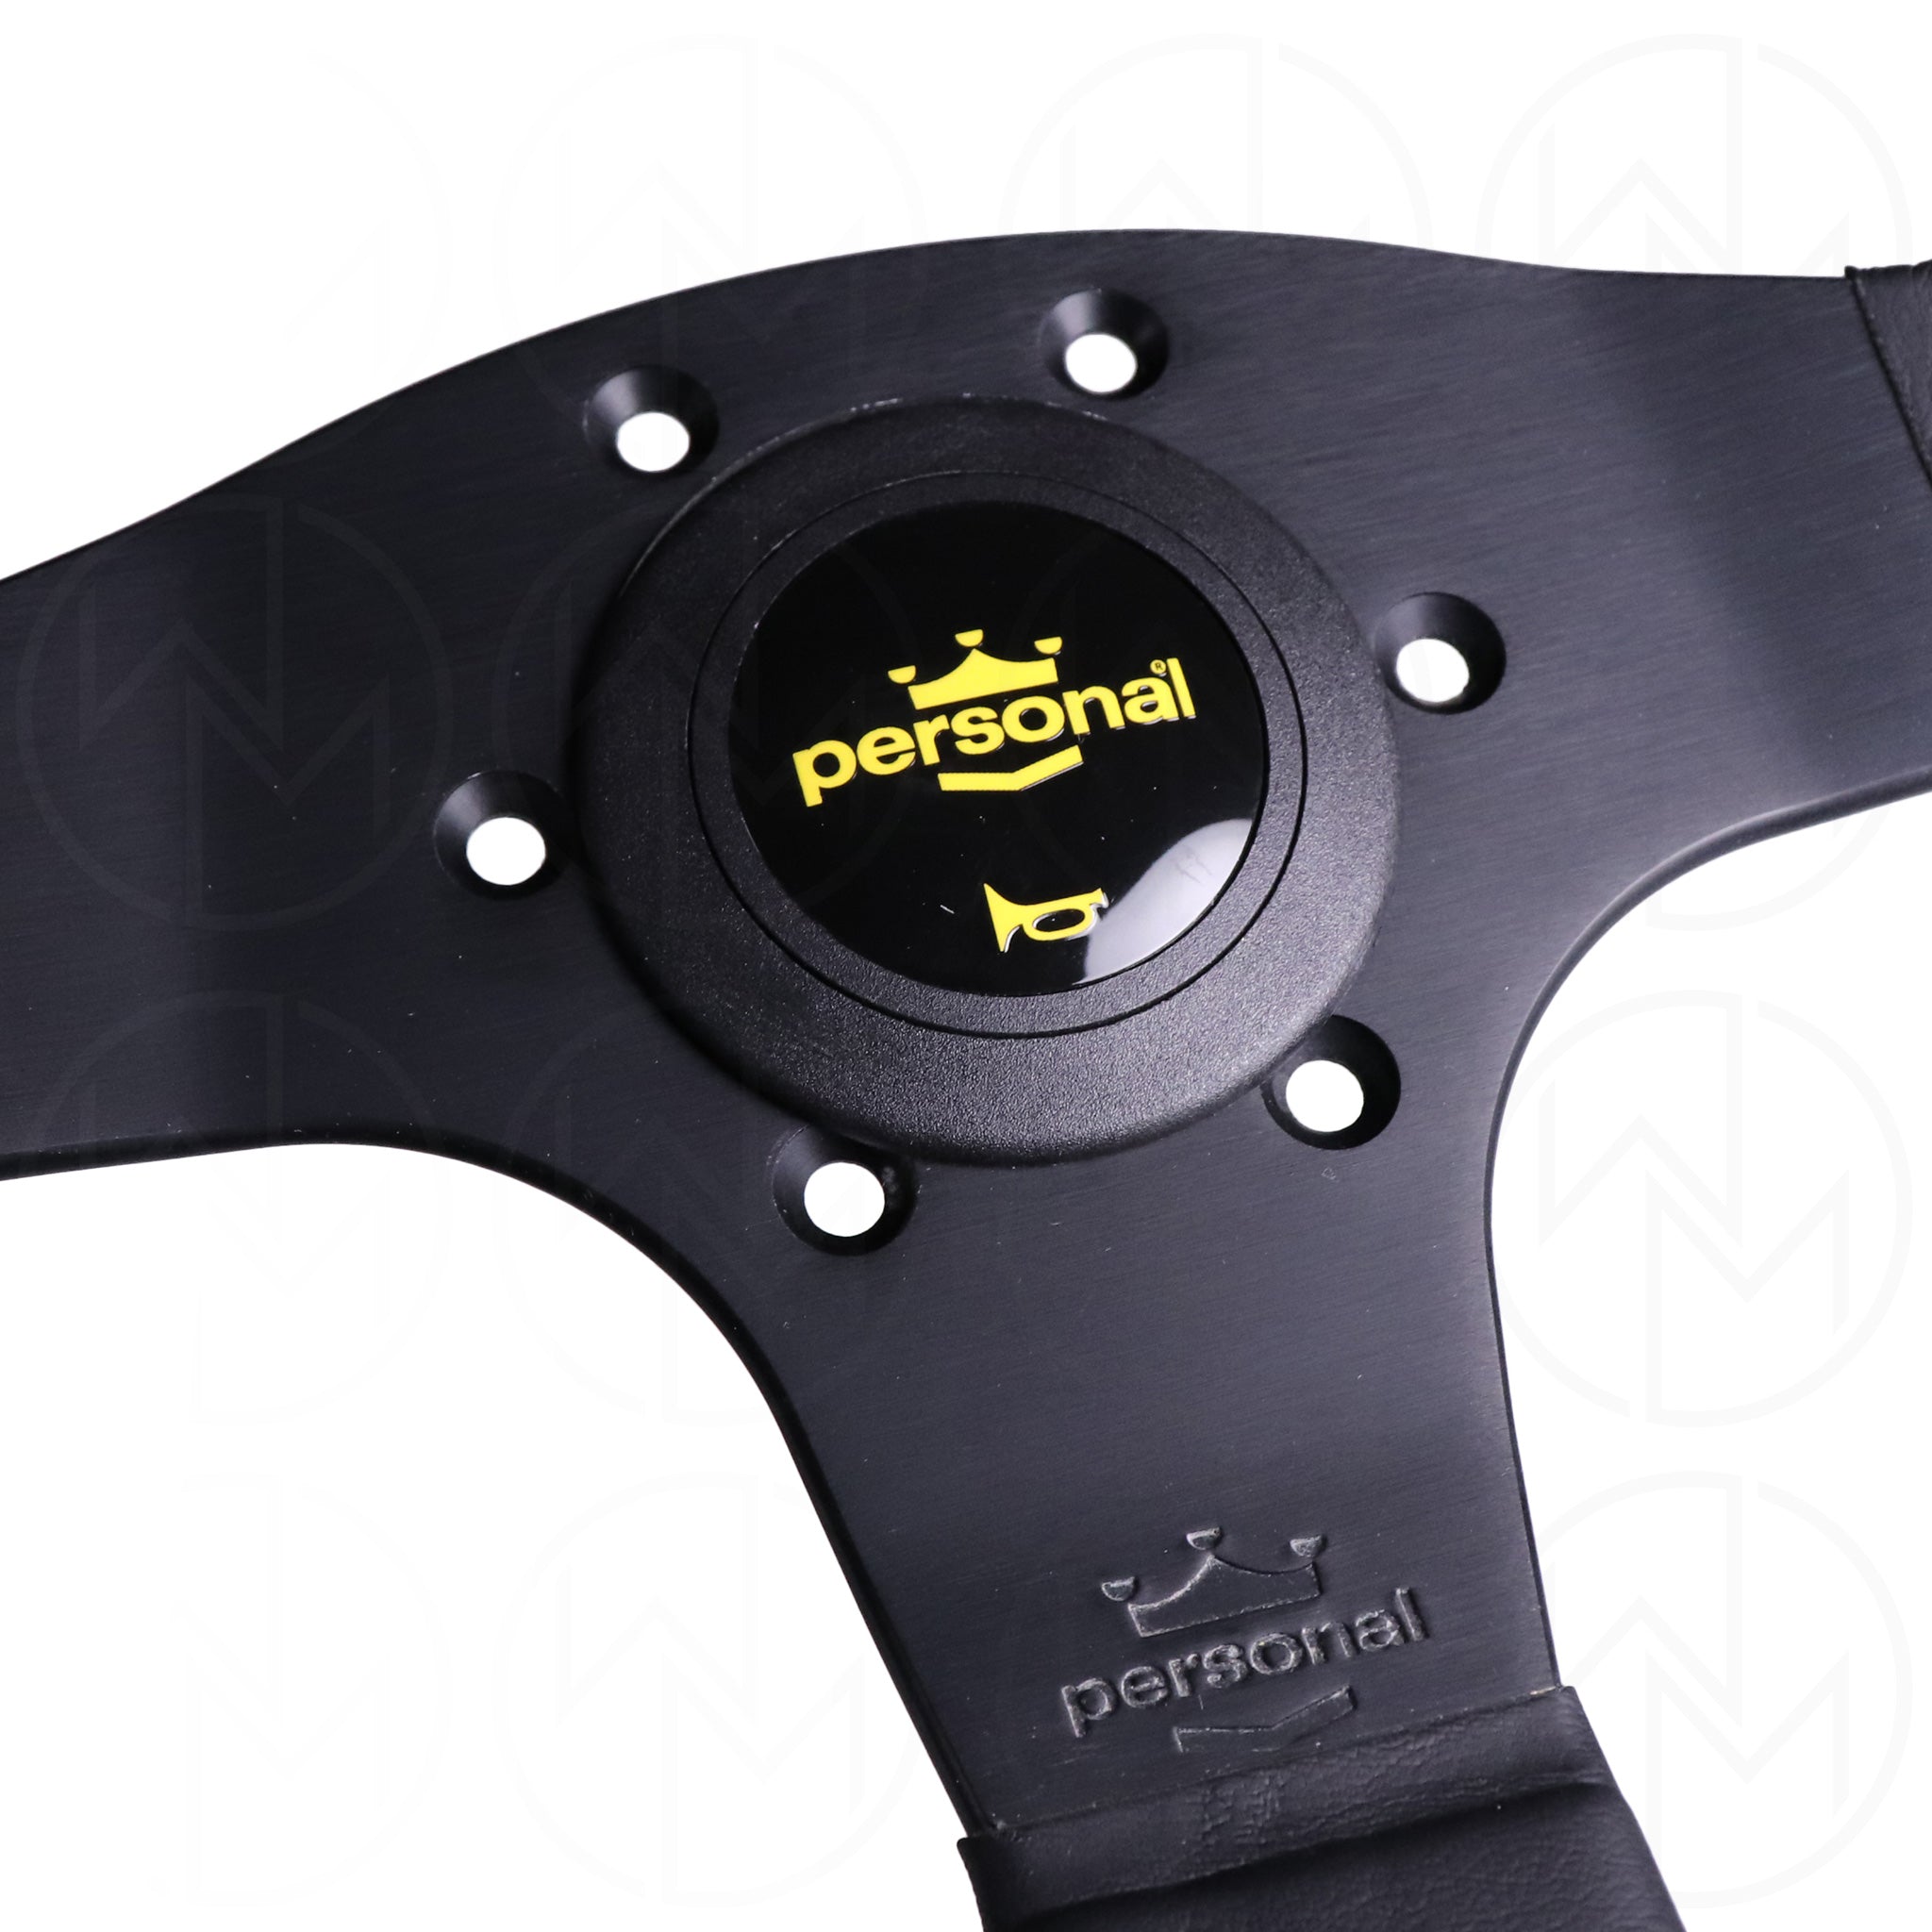 Personal Neo Actis Steering Wheel - 340mm Leather w/Yellow Stitch